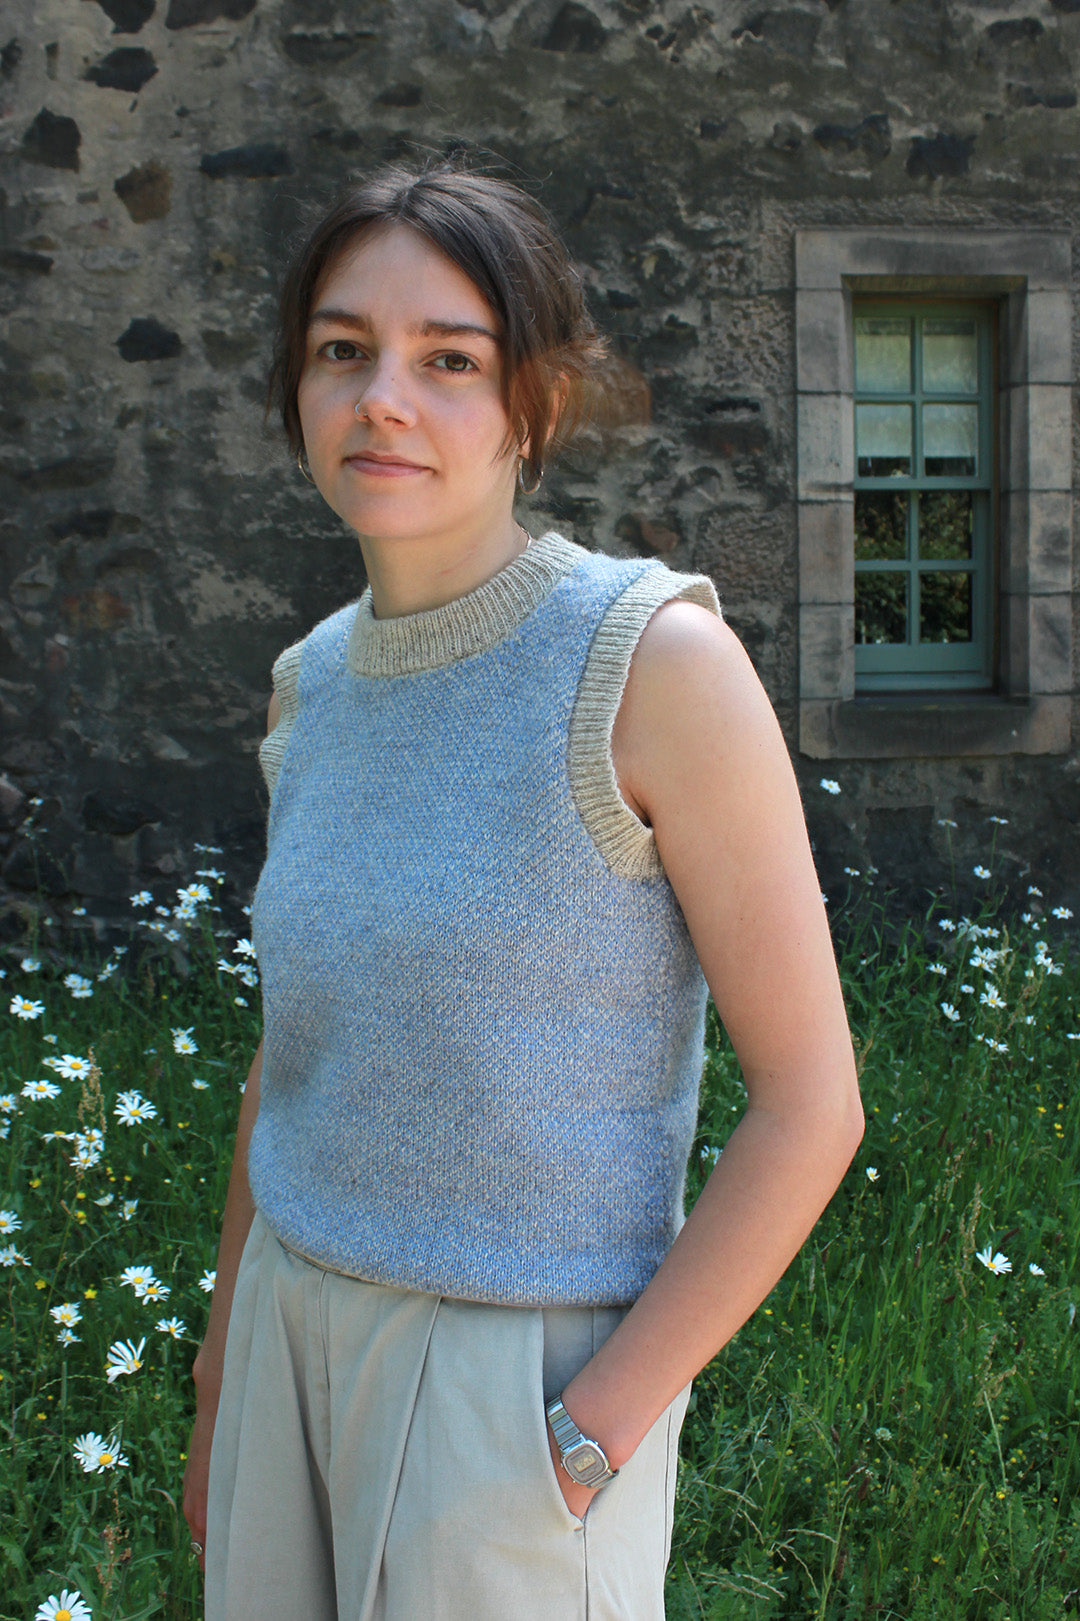 Shetland knitted tank top in pale blue and natural pale grey wool with round neck.